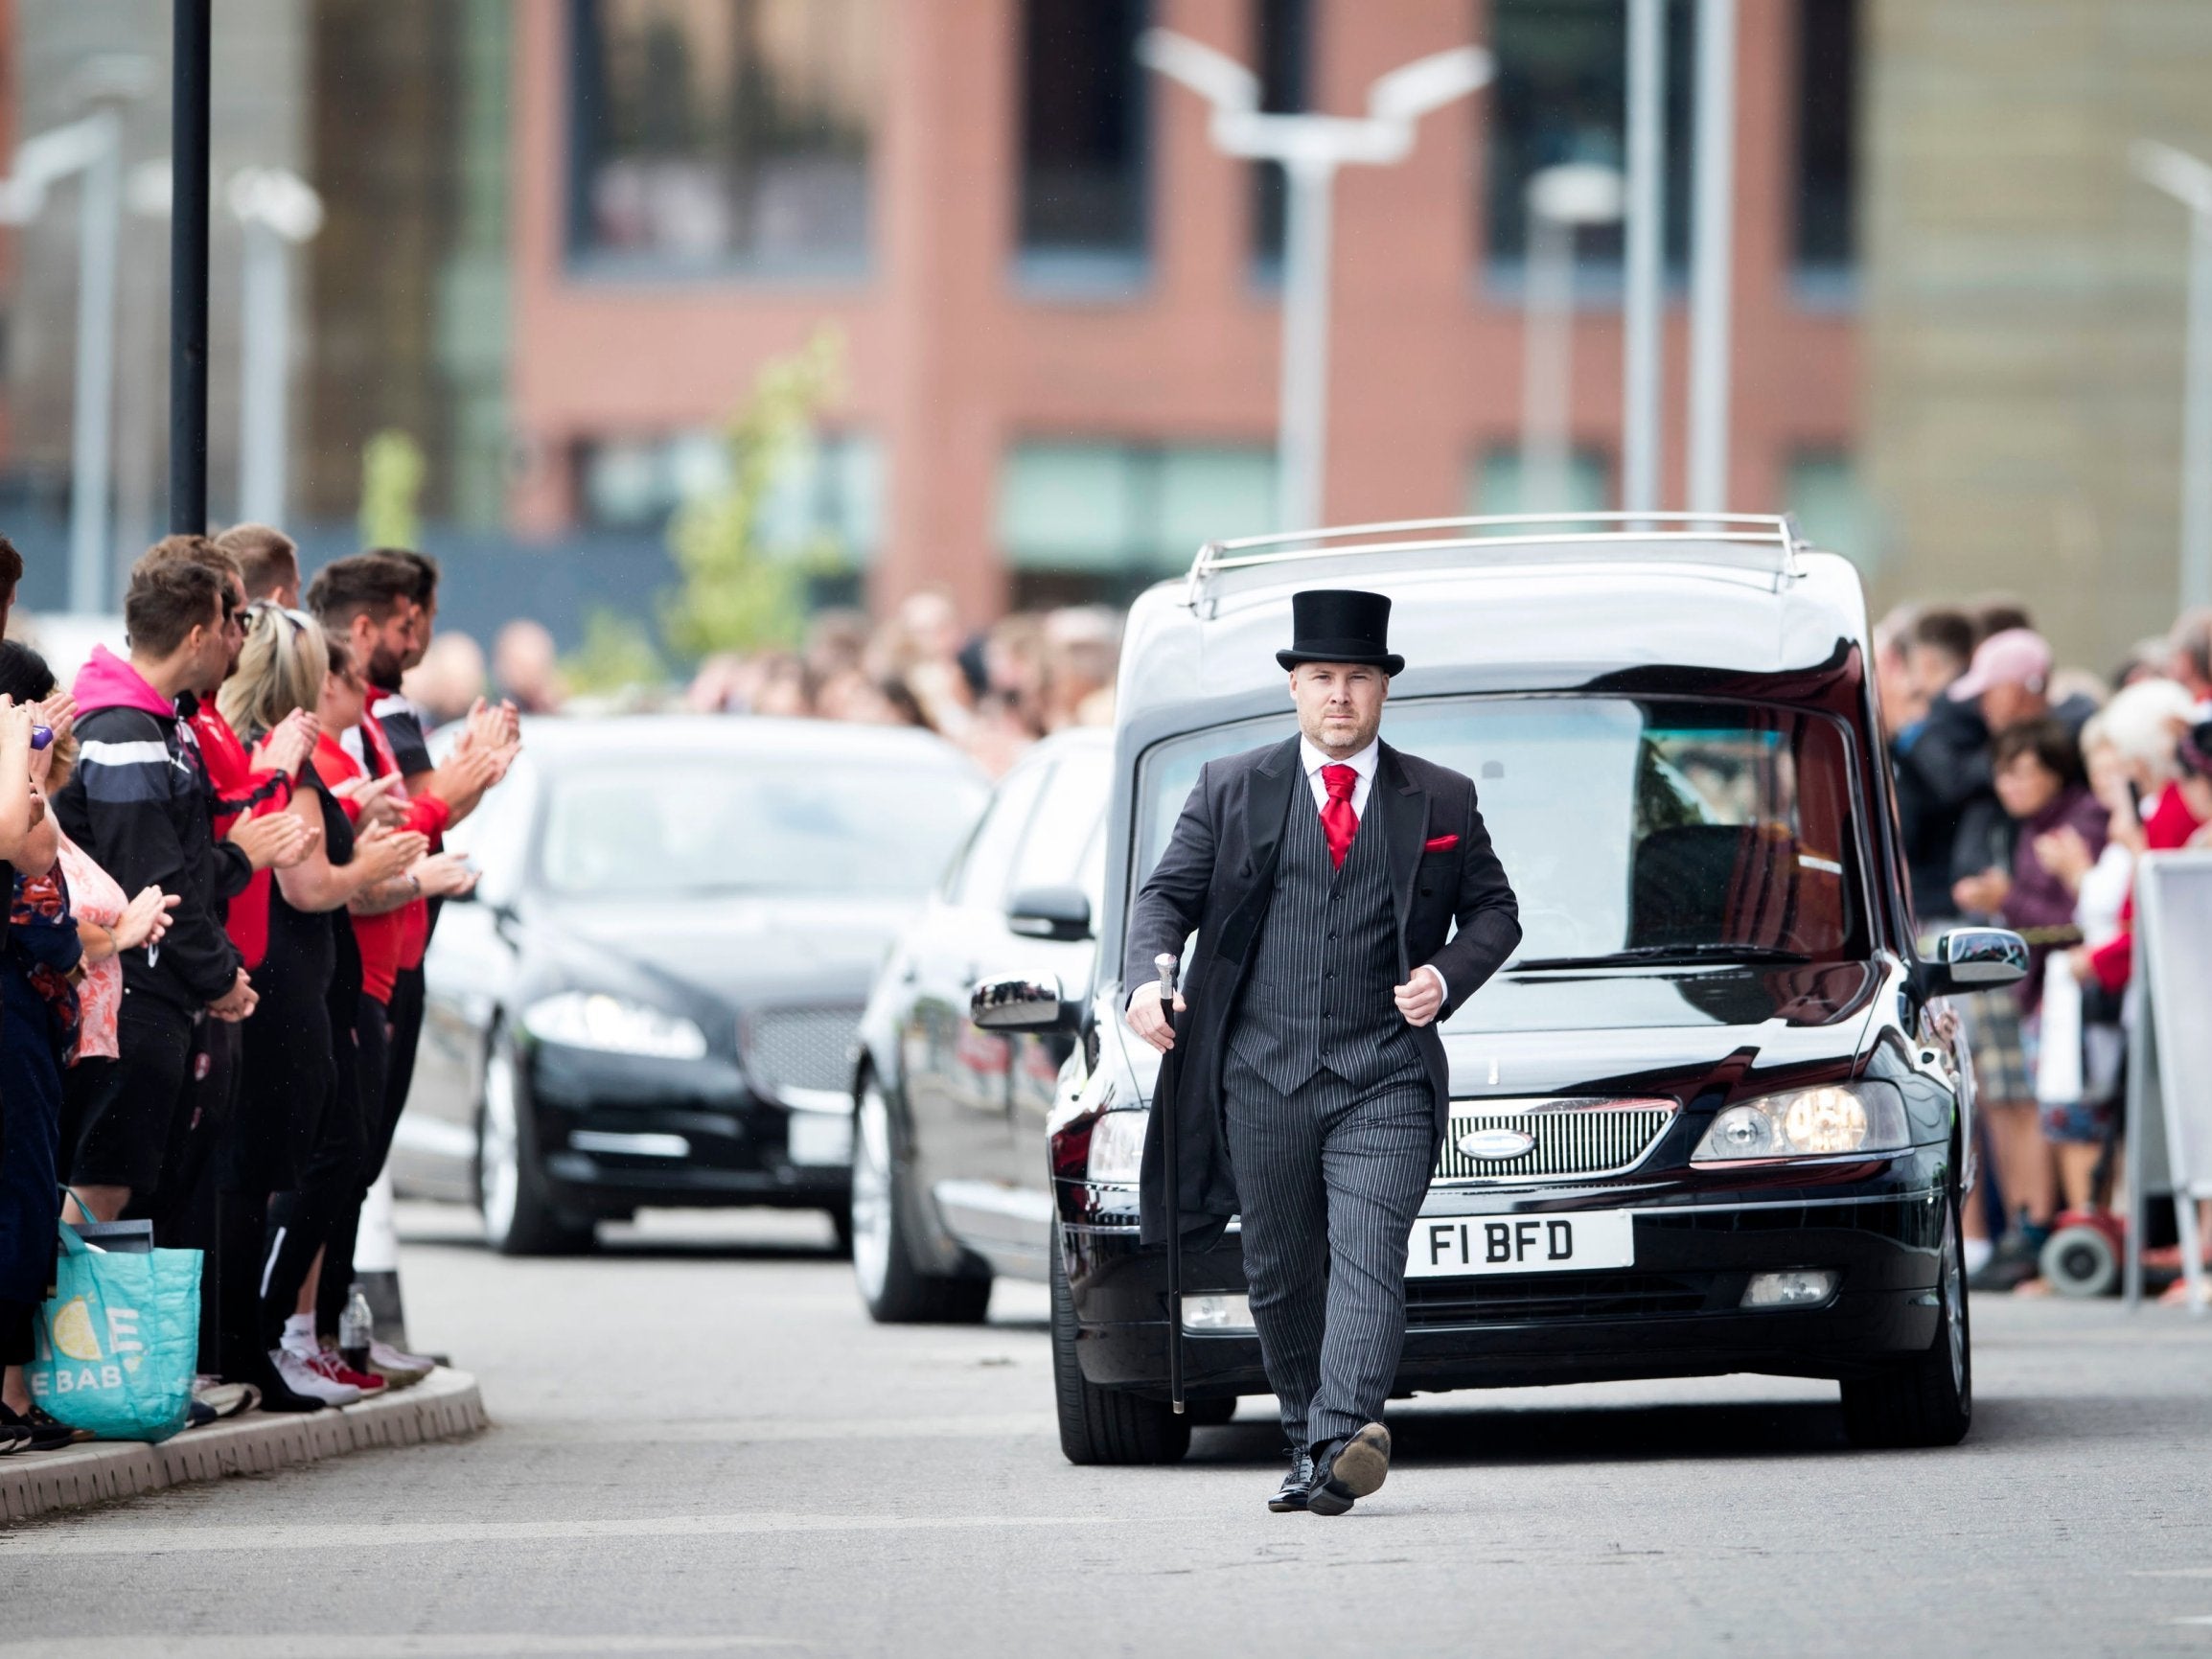 The cortege carrying the coffin of Barry Chuckle arrives at the New York Stadium